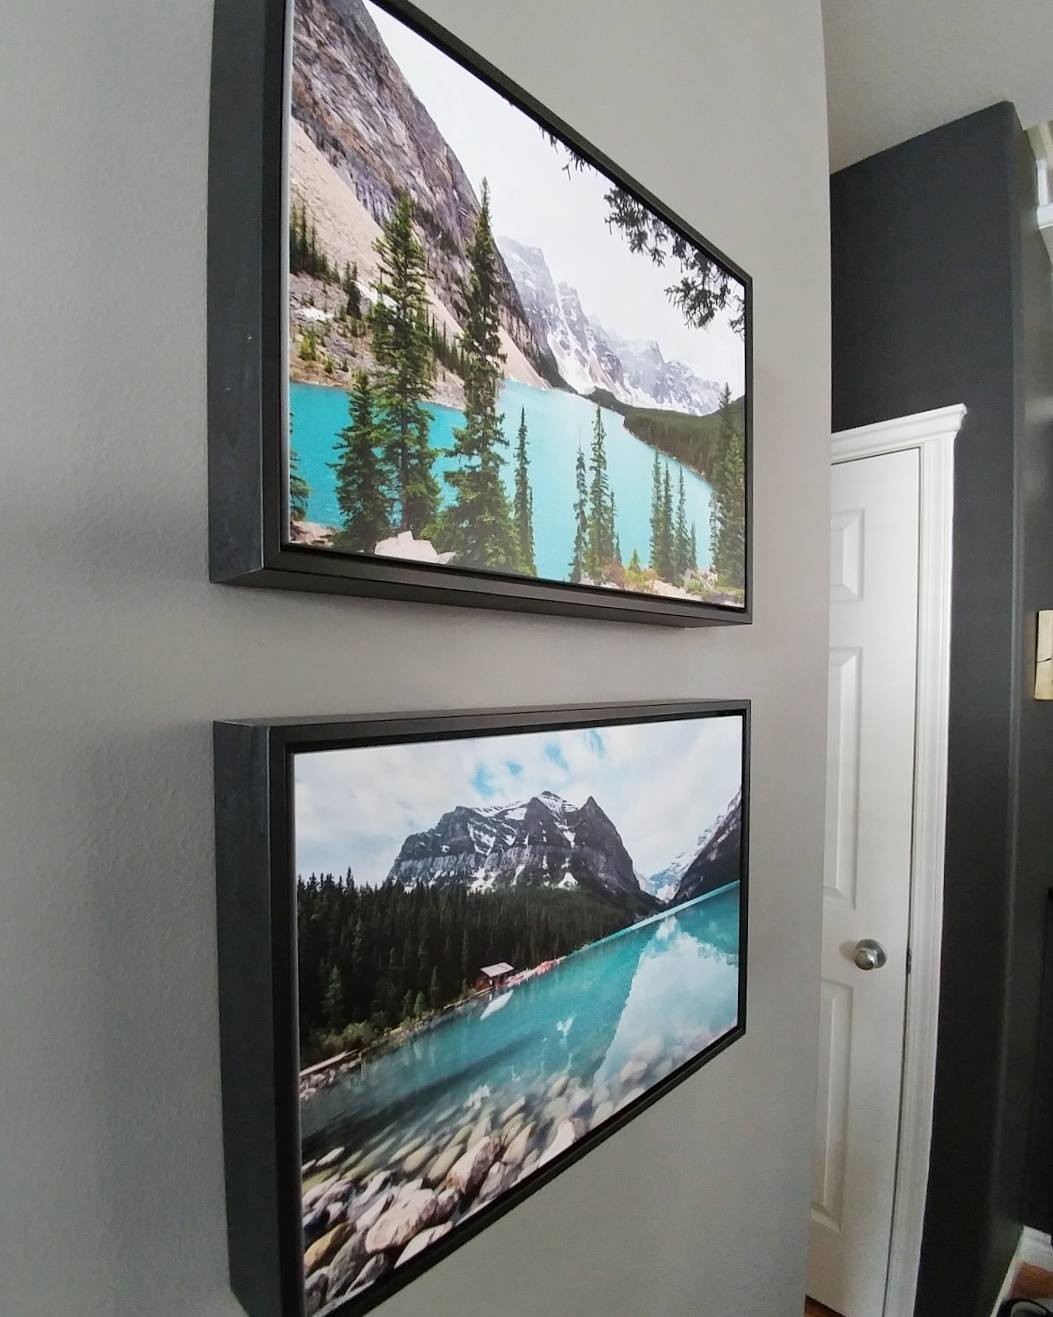 Photos of Banff, Alberta printed on Posterjack Gallery Boxes